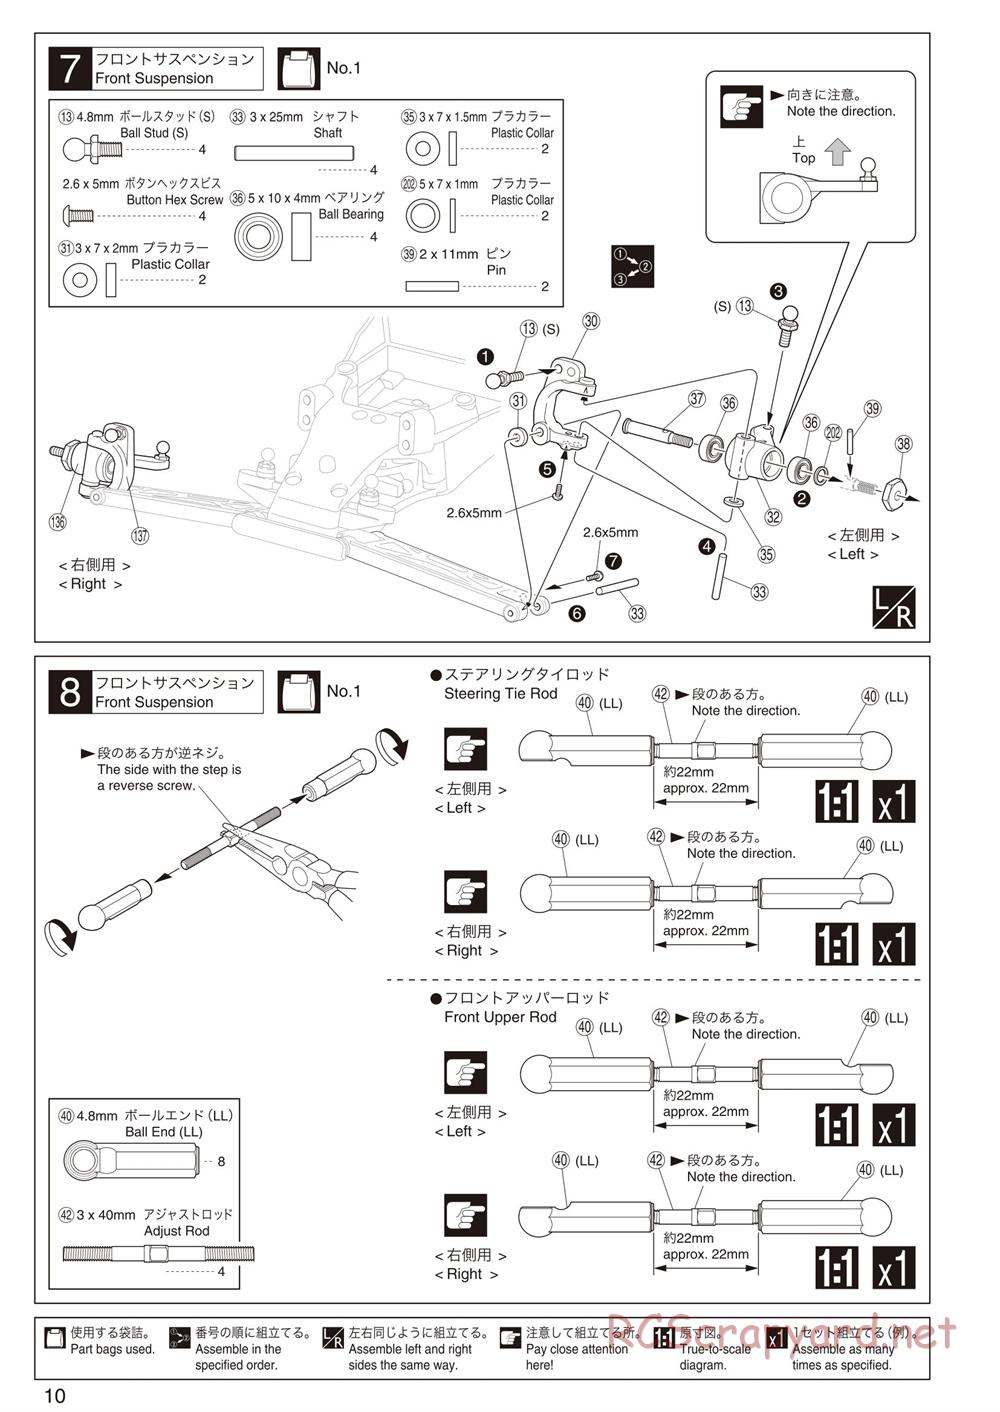 Kyosho - Ultima RB5 SP - Manual - Page 10